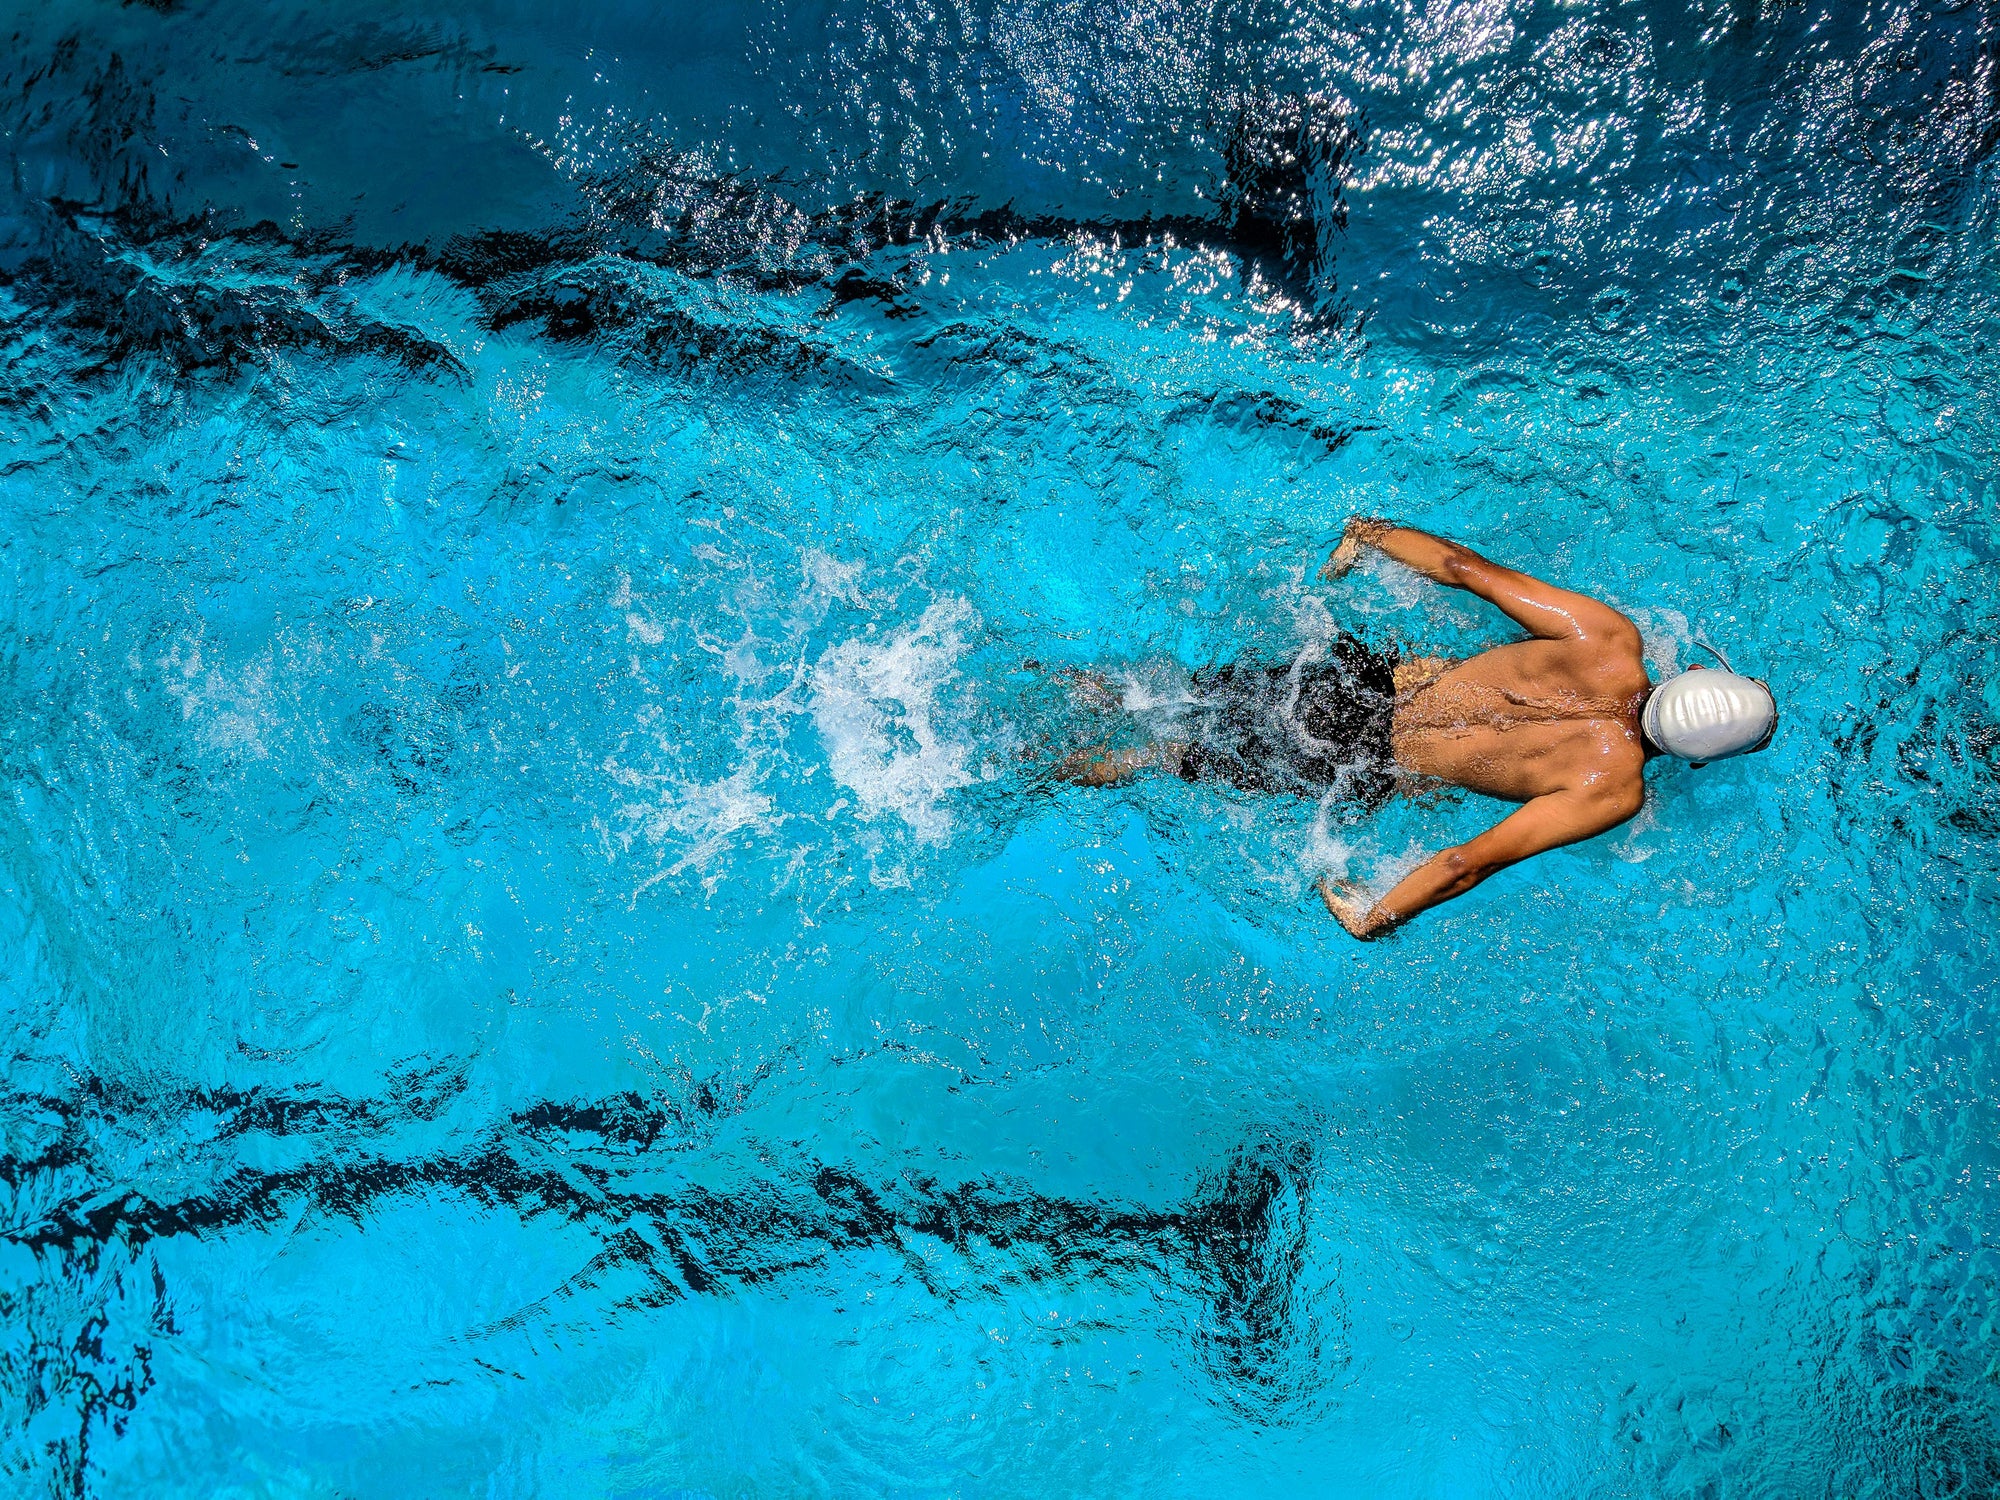 An image of a man swimming in the pool.